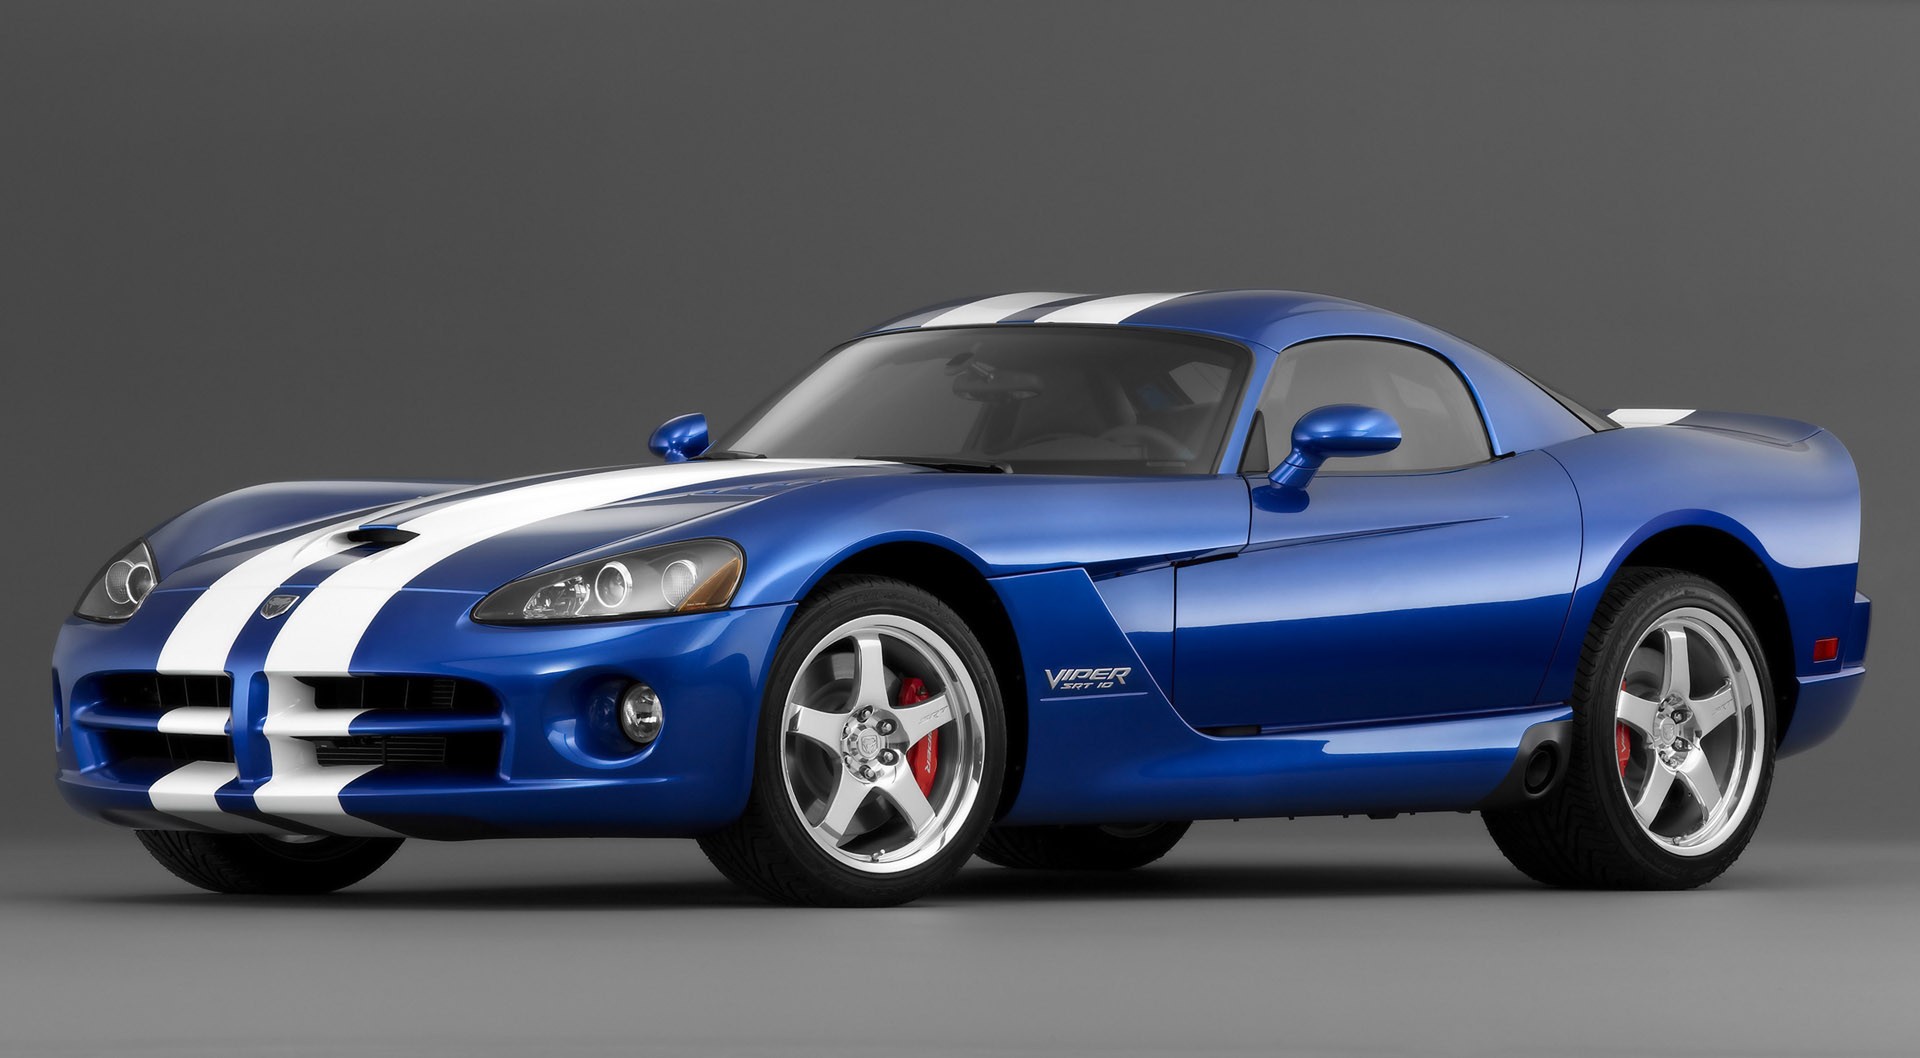 General 1920x1058 car blue cars Dodge Viper Dodge vehicle gray background simple background American cars racing stripes